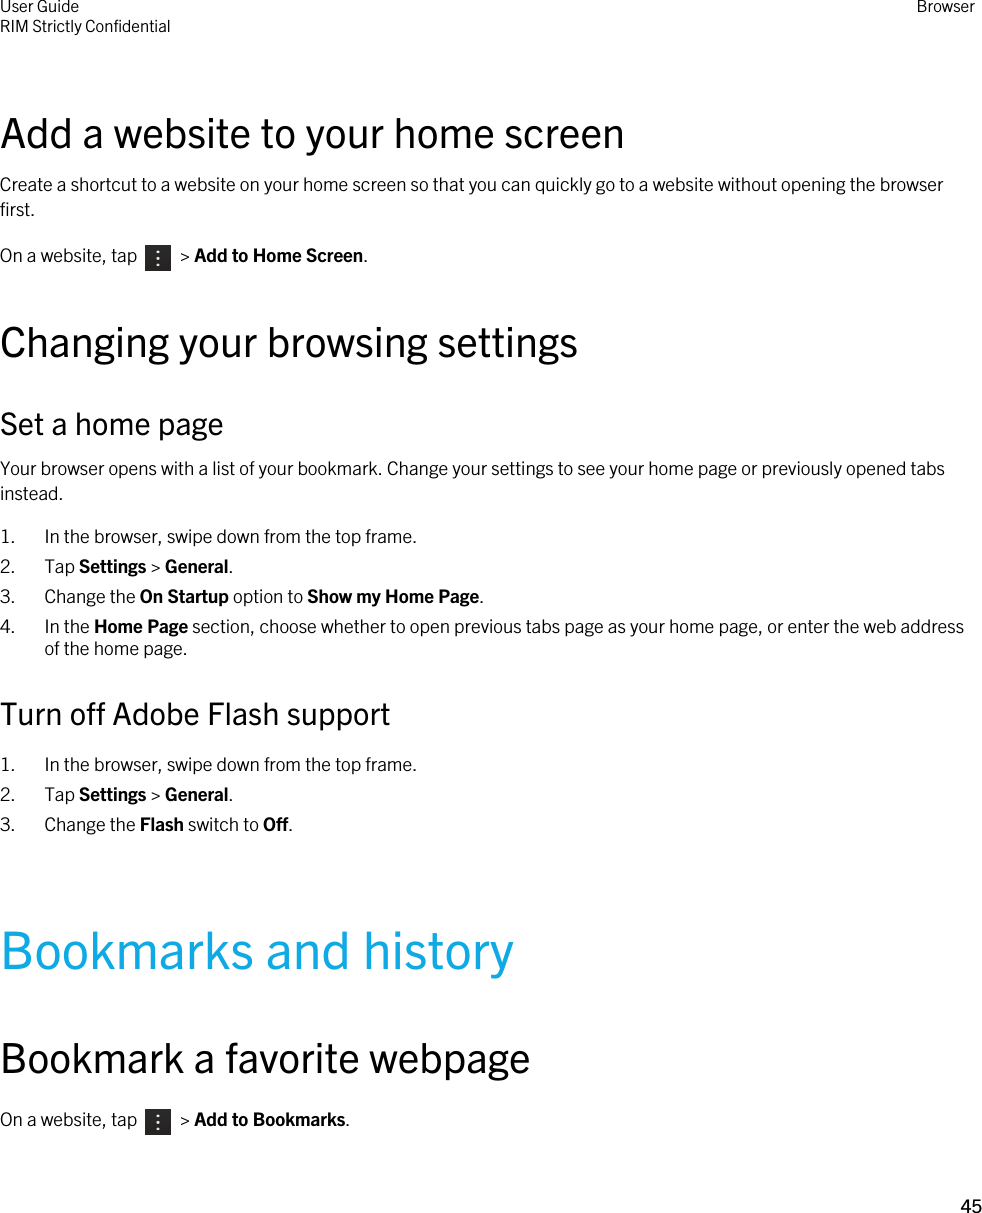 Add a website to your home screenCreate a shortcut to a website on your home screen so that you can quickly go to a website without opening the browser first.On a website, tap    &gt; Add to Home Screen.Changing your browsing settingsSet a home pageYour browser opens with a list of your bookmark. Change your settings to see your home page or previously opened tabs instead.1. In the browser, swipe down from the top frame.2. Tap Settings &gt; General.3. Change the On Startup option to Show my Home Page.4. In the Home Page section, choose whether to open previous tabs page as your home page, or enter the web address of the home page.Turn off Adobe Flash support1. In the browser, swipe down from the top frame.2. Tap Settings &gt; General.3. Change the Flash switch to Off.Bookmarks and historyBookmark a favorite webpageOn a website, tap    &gt; Add to Bookmarks.User GuideRIM Strictly ConfidentialBrowser45 